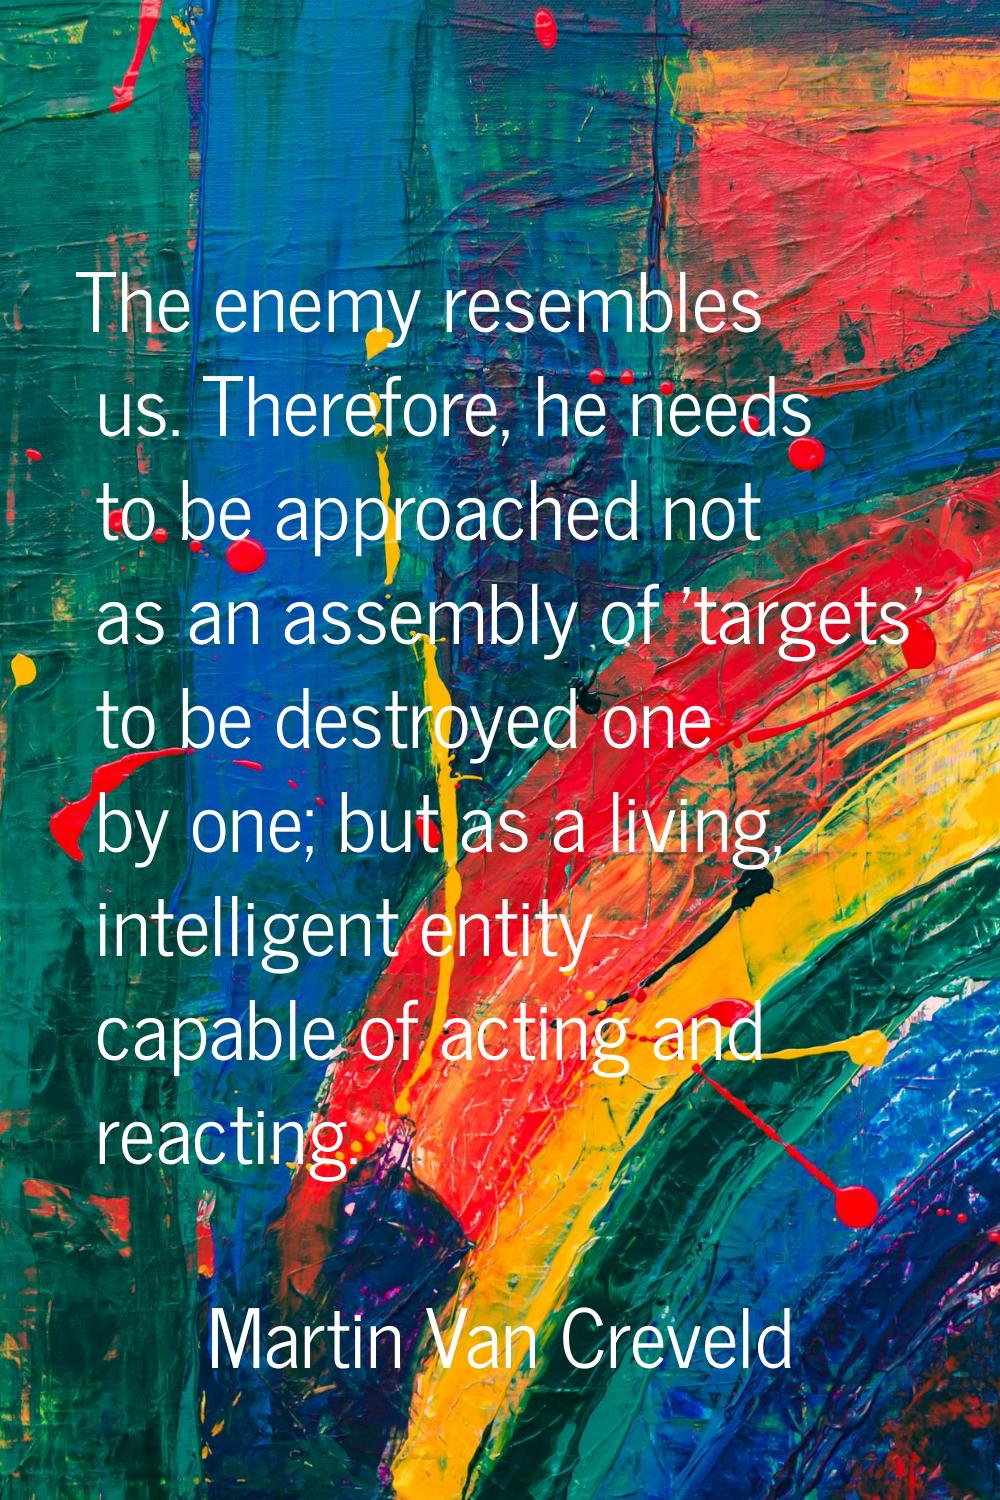 The enemy resembles us. Therefore, he needs to be approached not as an assembly of 'targets' to be 